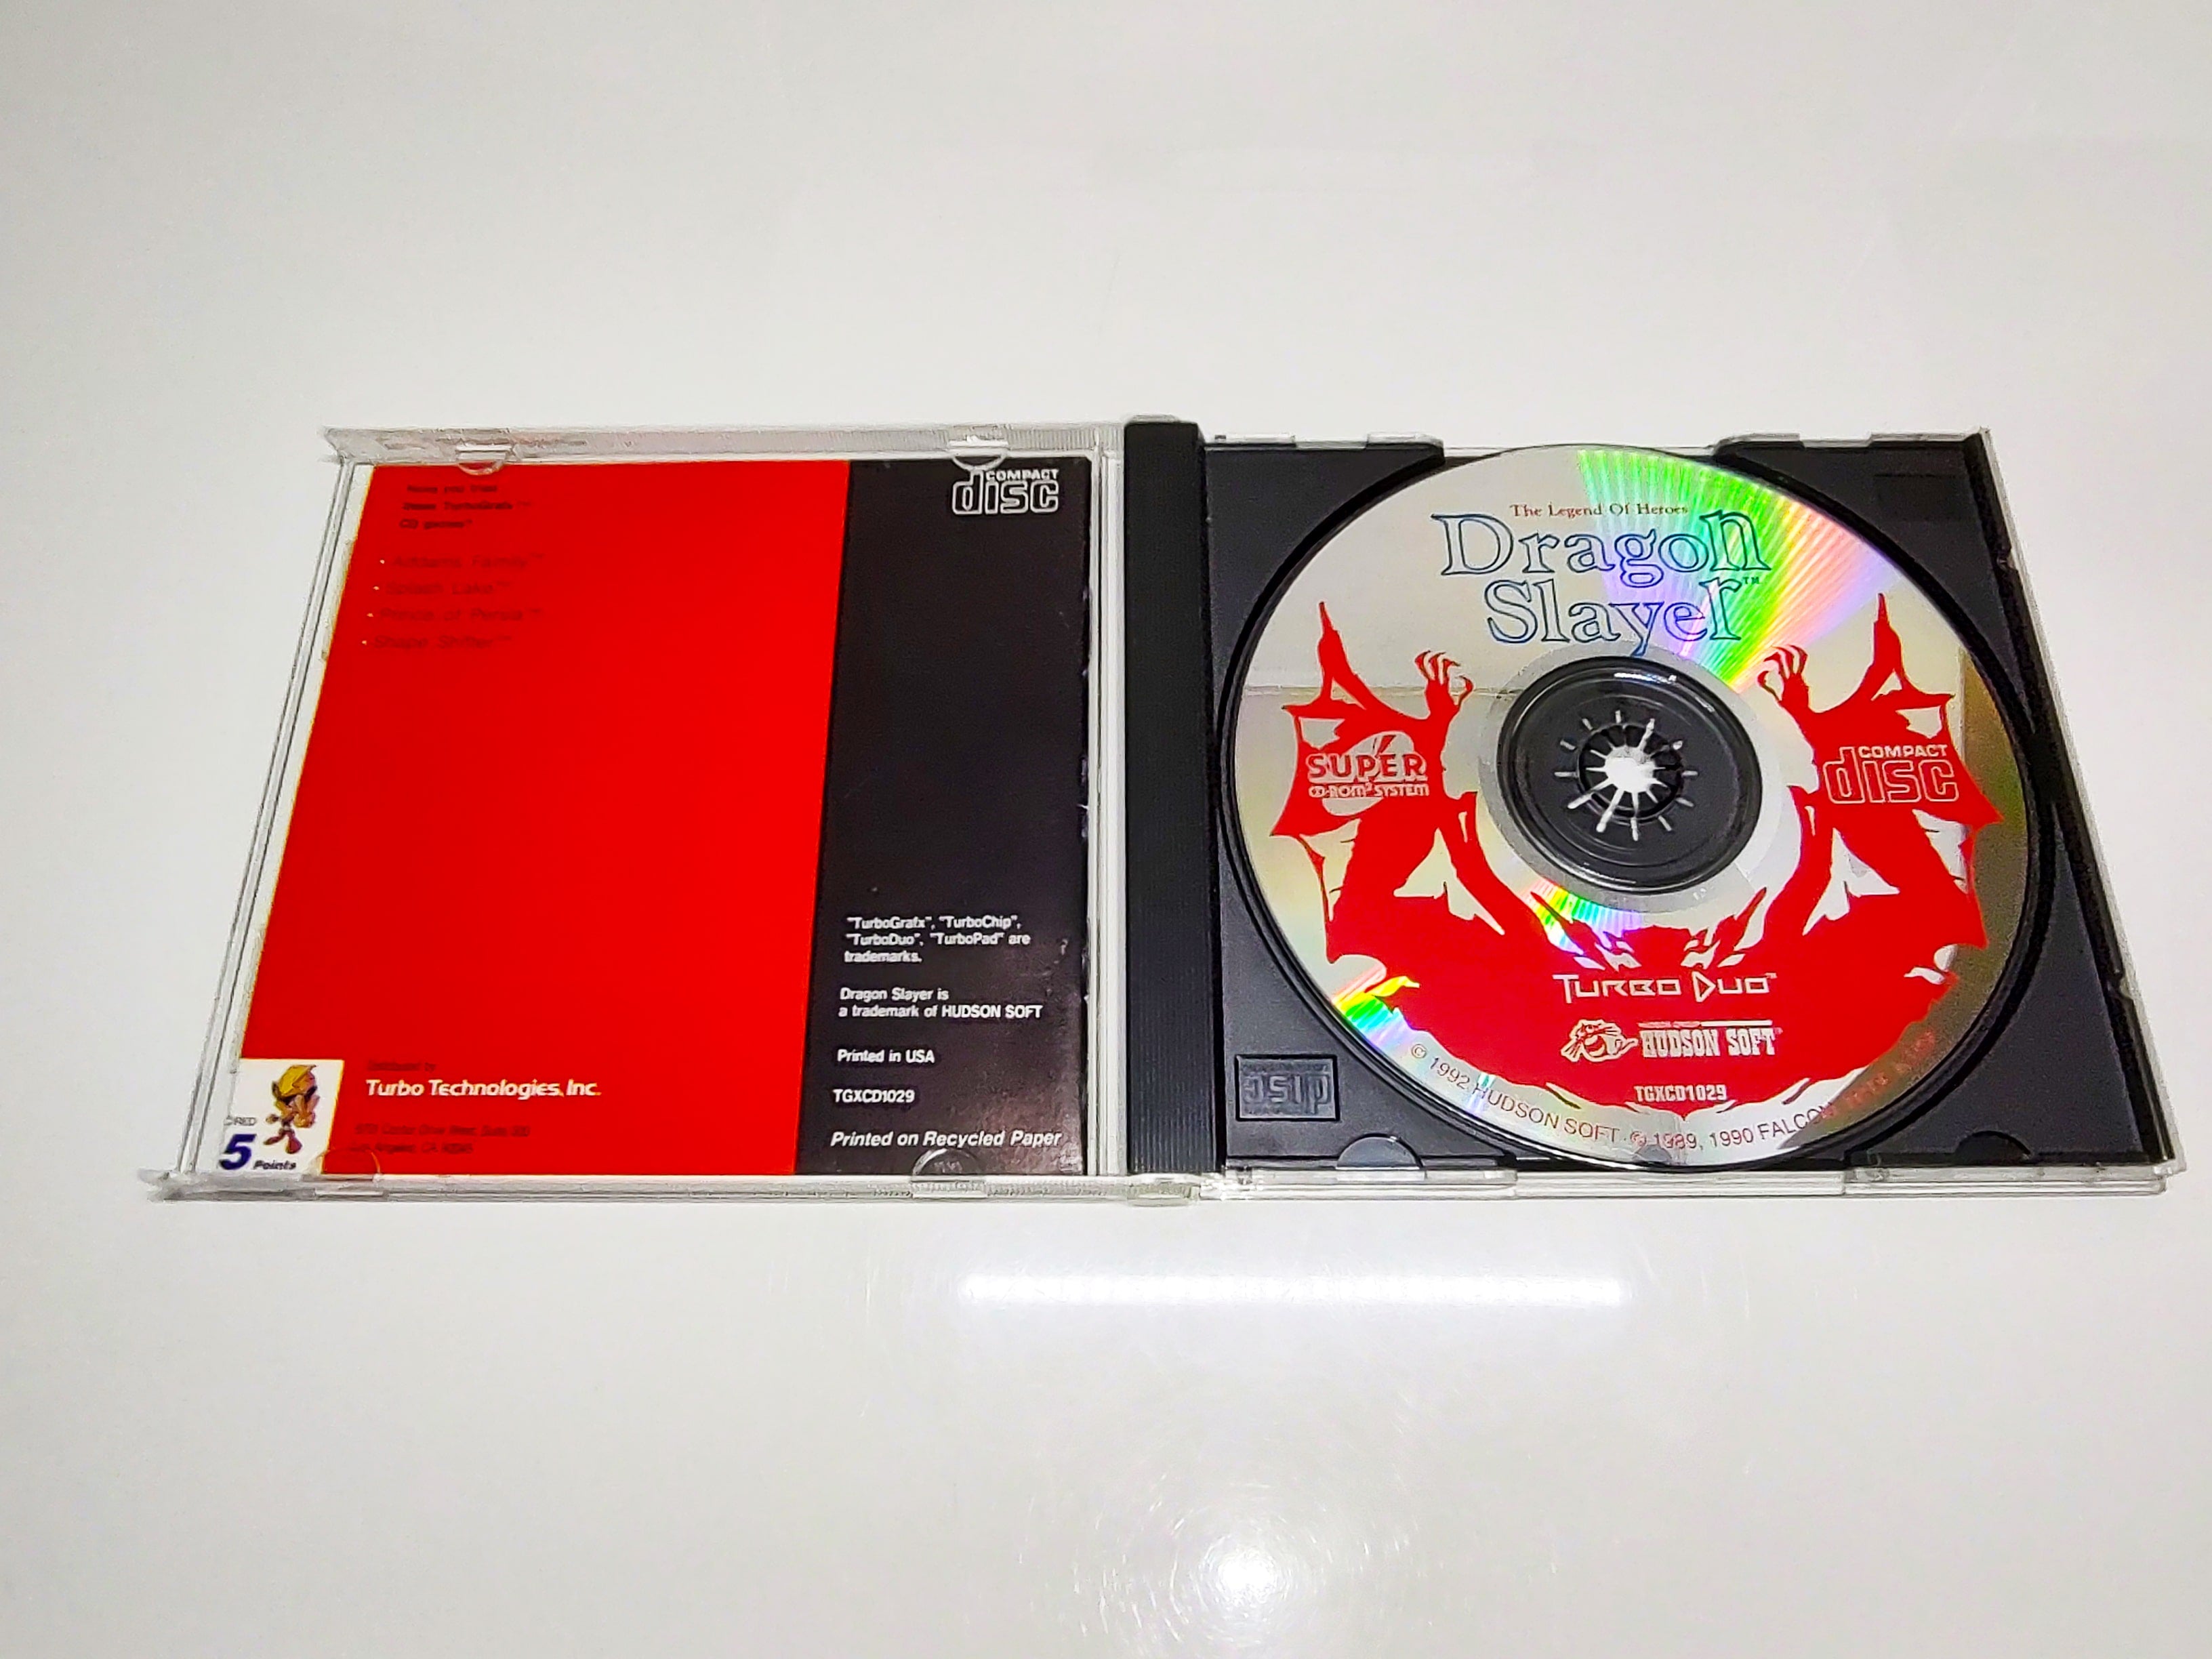 Dragon Slayer: The Legend of Heroes | TurboGrafx-16 Super CD | Manual and Disc